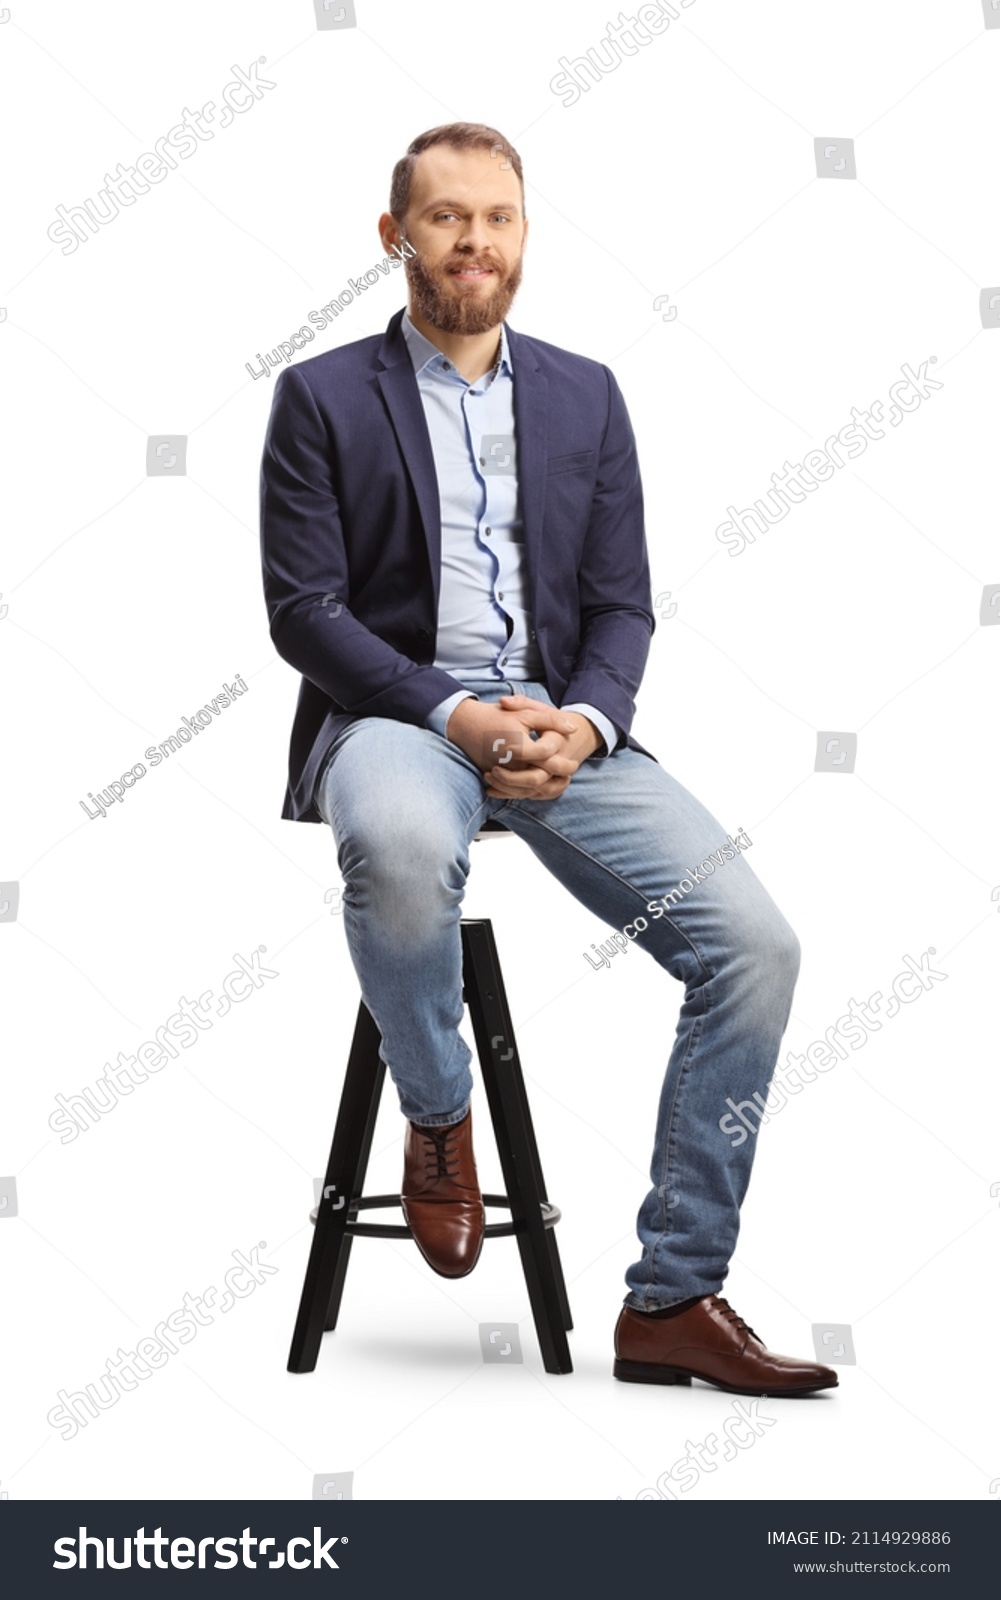 Full length portrait of a man in a suit and jeans sitting on a bar chair isolated on white background #2114929886